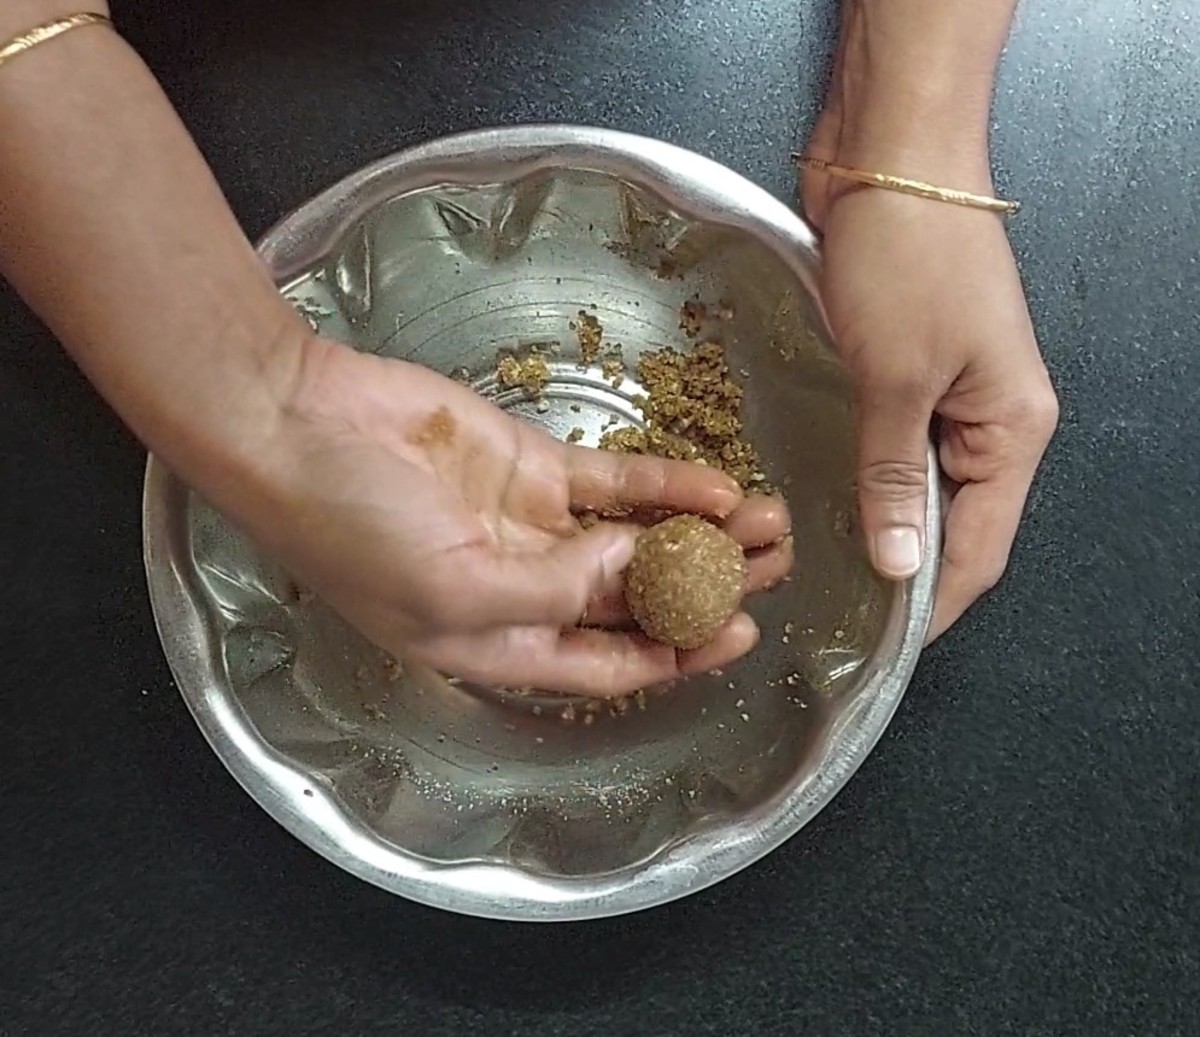 Transfer to a plate. Prepare the remaining laddus using the mixture.